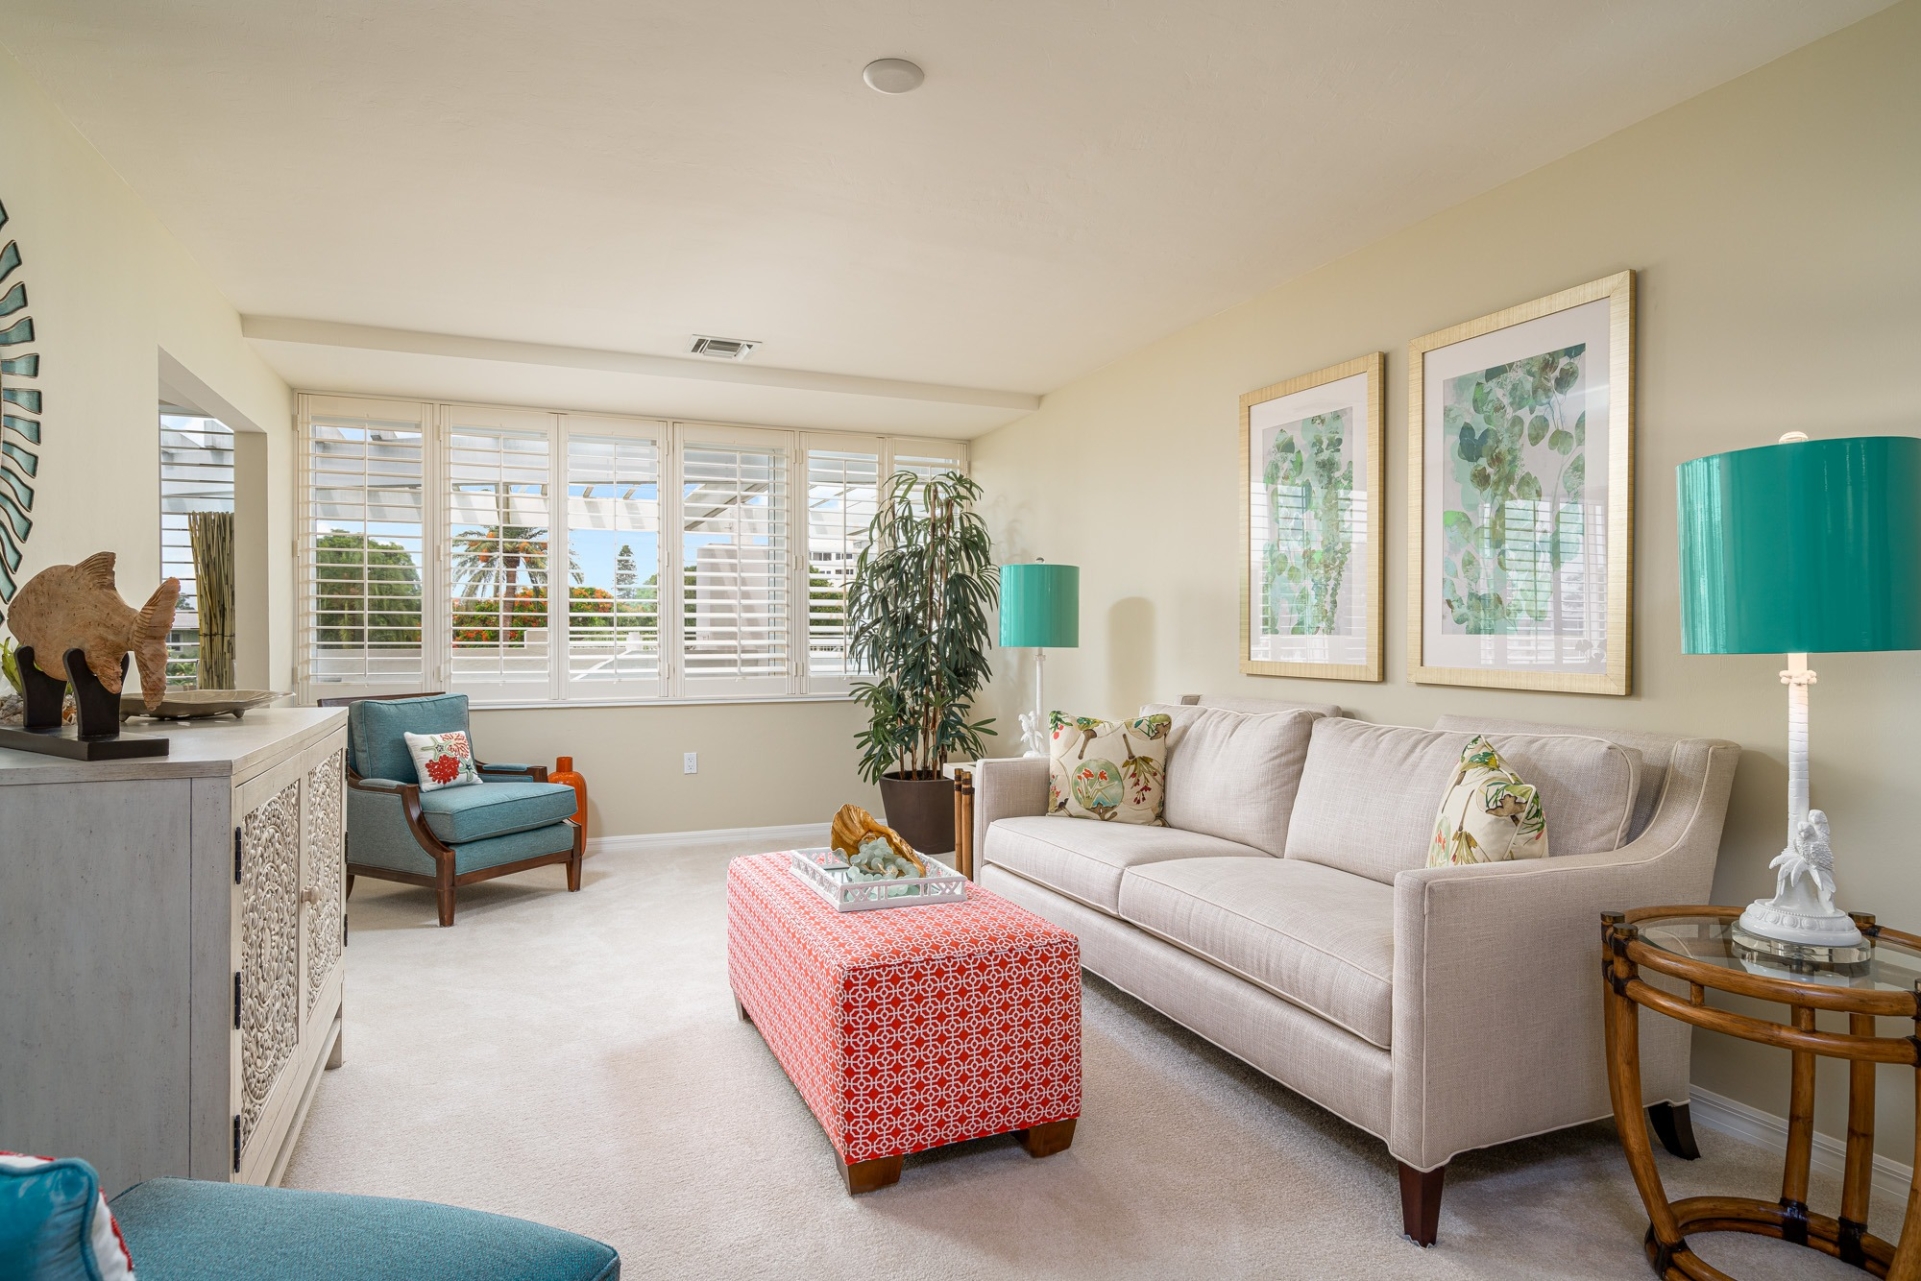 The living room in the Junonia Model Home at Shell Point Retirement Community